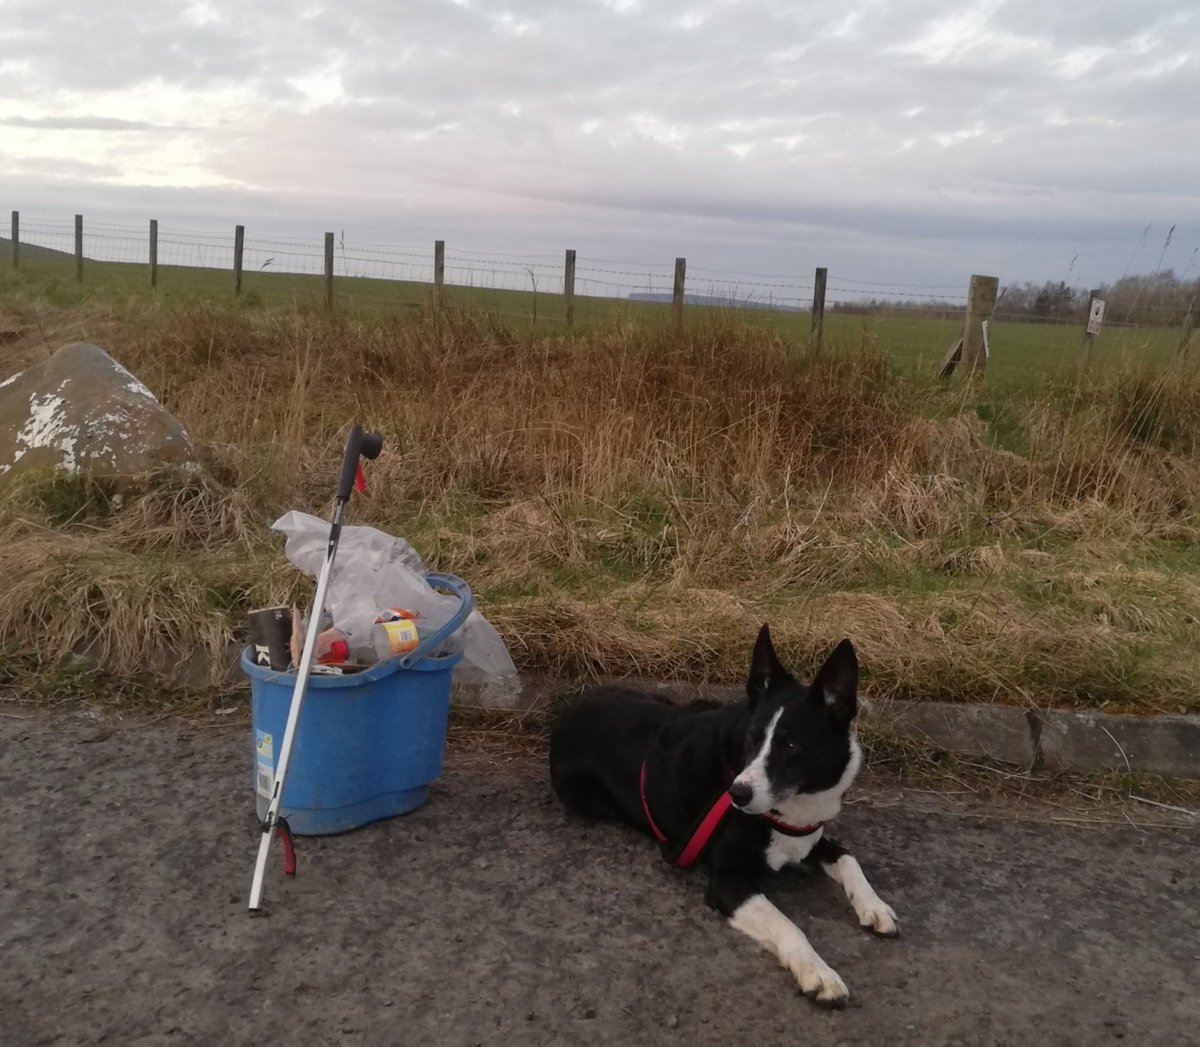 #SpringCleanScotland #BigBagChallenge @KSBScotland okay no Big Bags but 'A Bucket a day will get the Litter Away'.@pawsonplastic